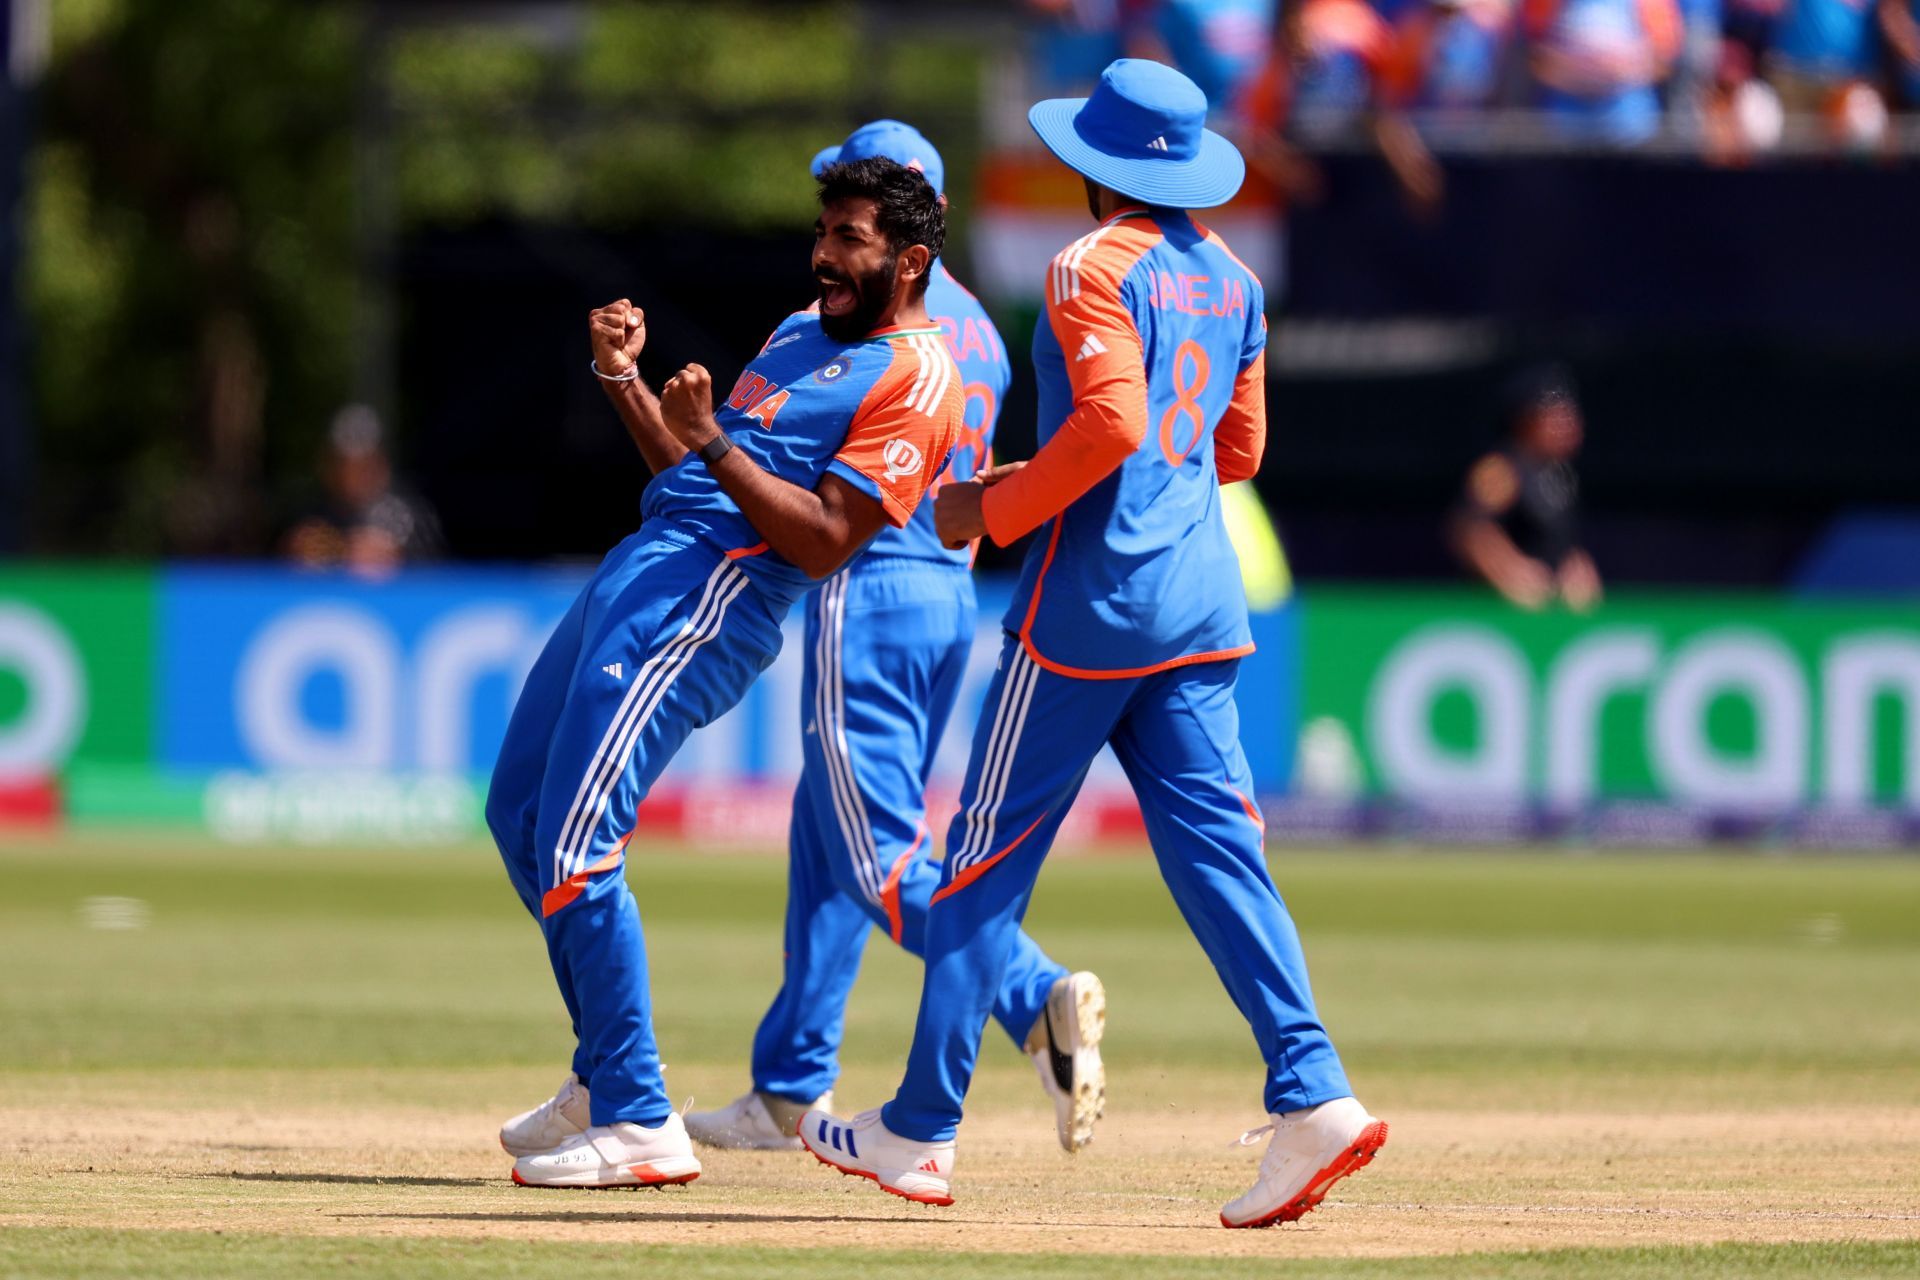 Jasprit Bumrah bowled 15 dot balls in his spell.